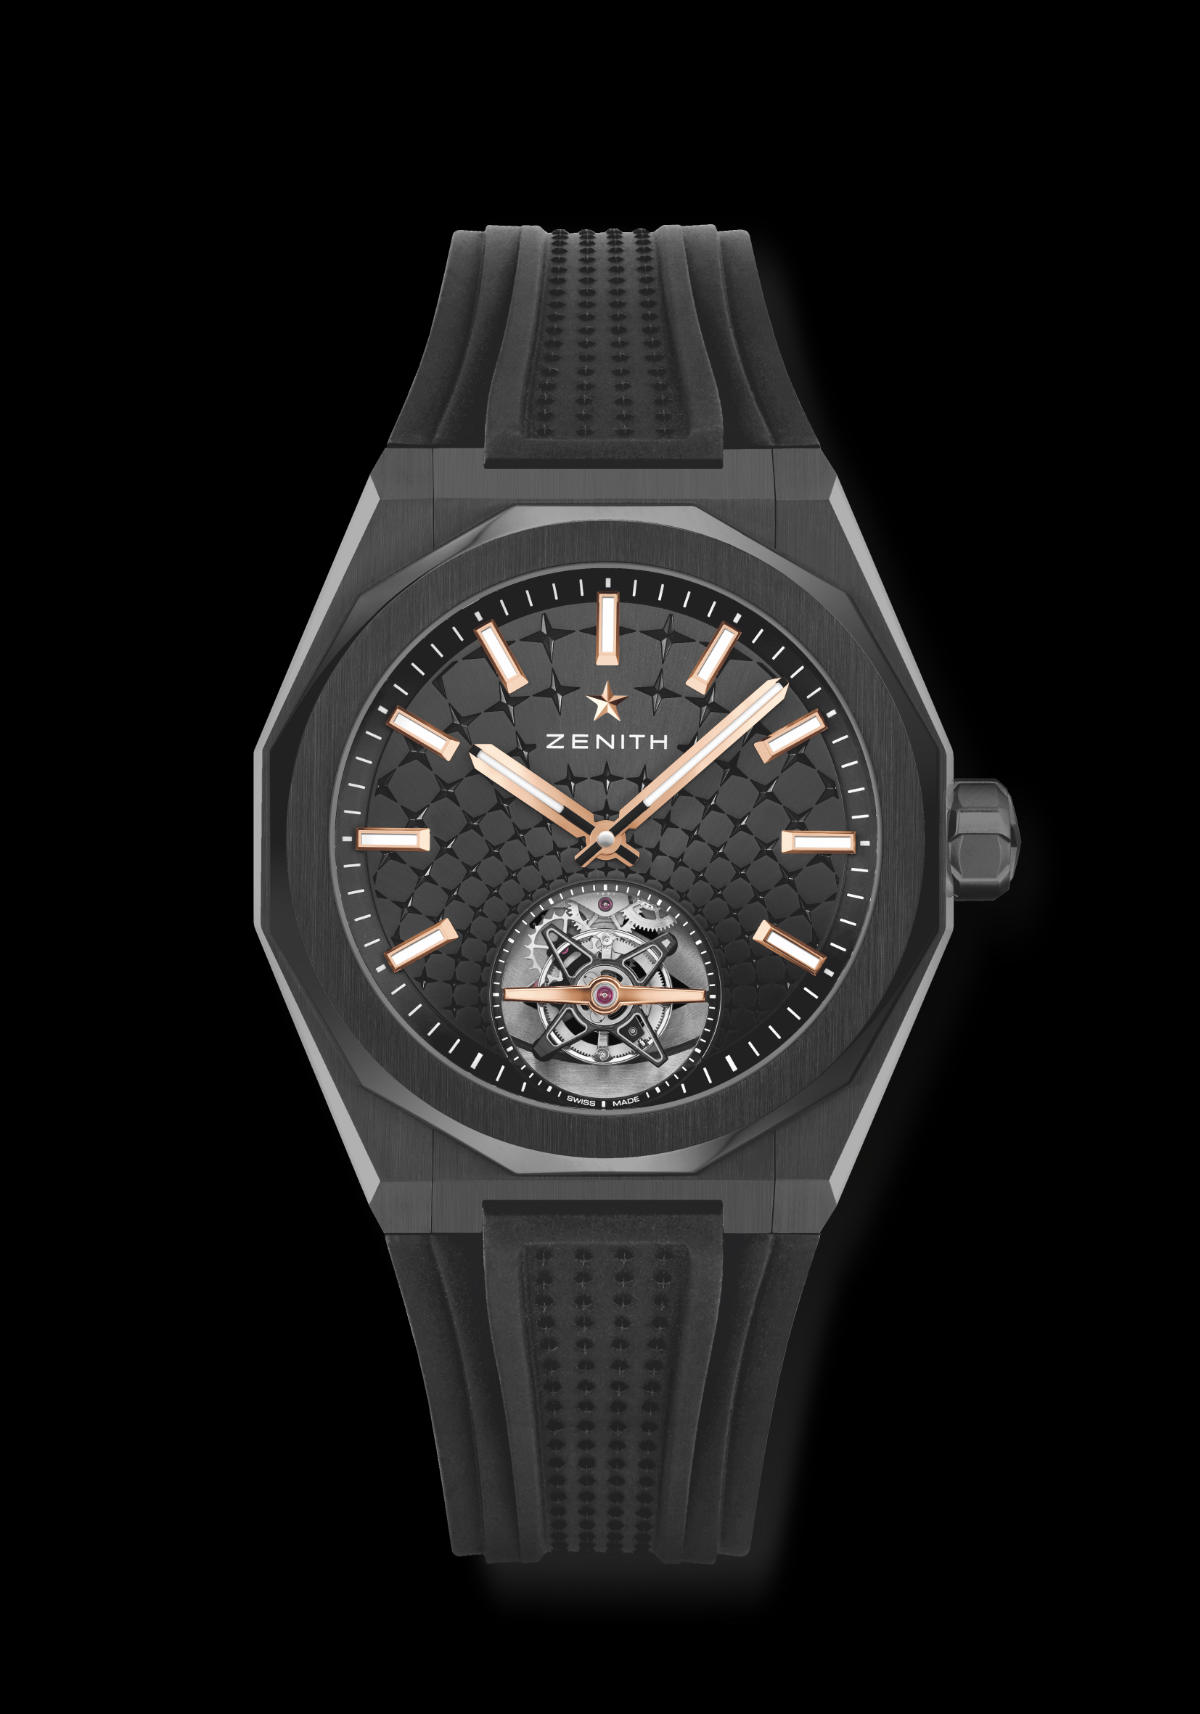 Zenith Elevates The Defy Skyline With A High-Frequency Tourbillon